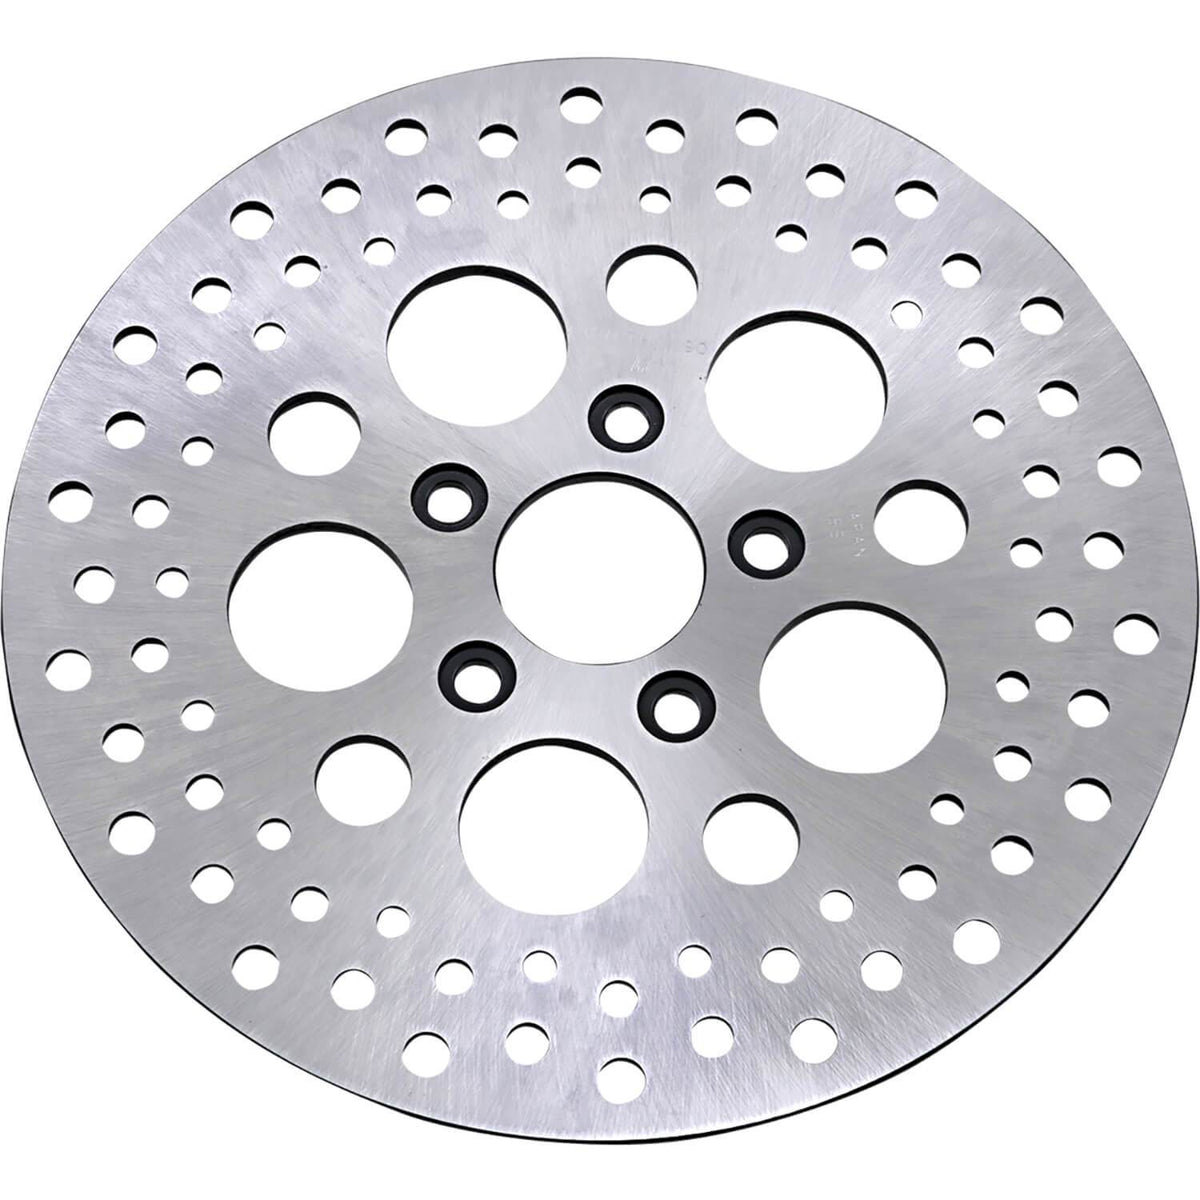 Drilled Stainless Steel Brake Rotor - 11.5 inches - Replaces  Harley-Davidson OEM# 44136-92, 41789-92